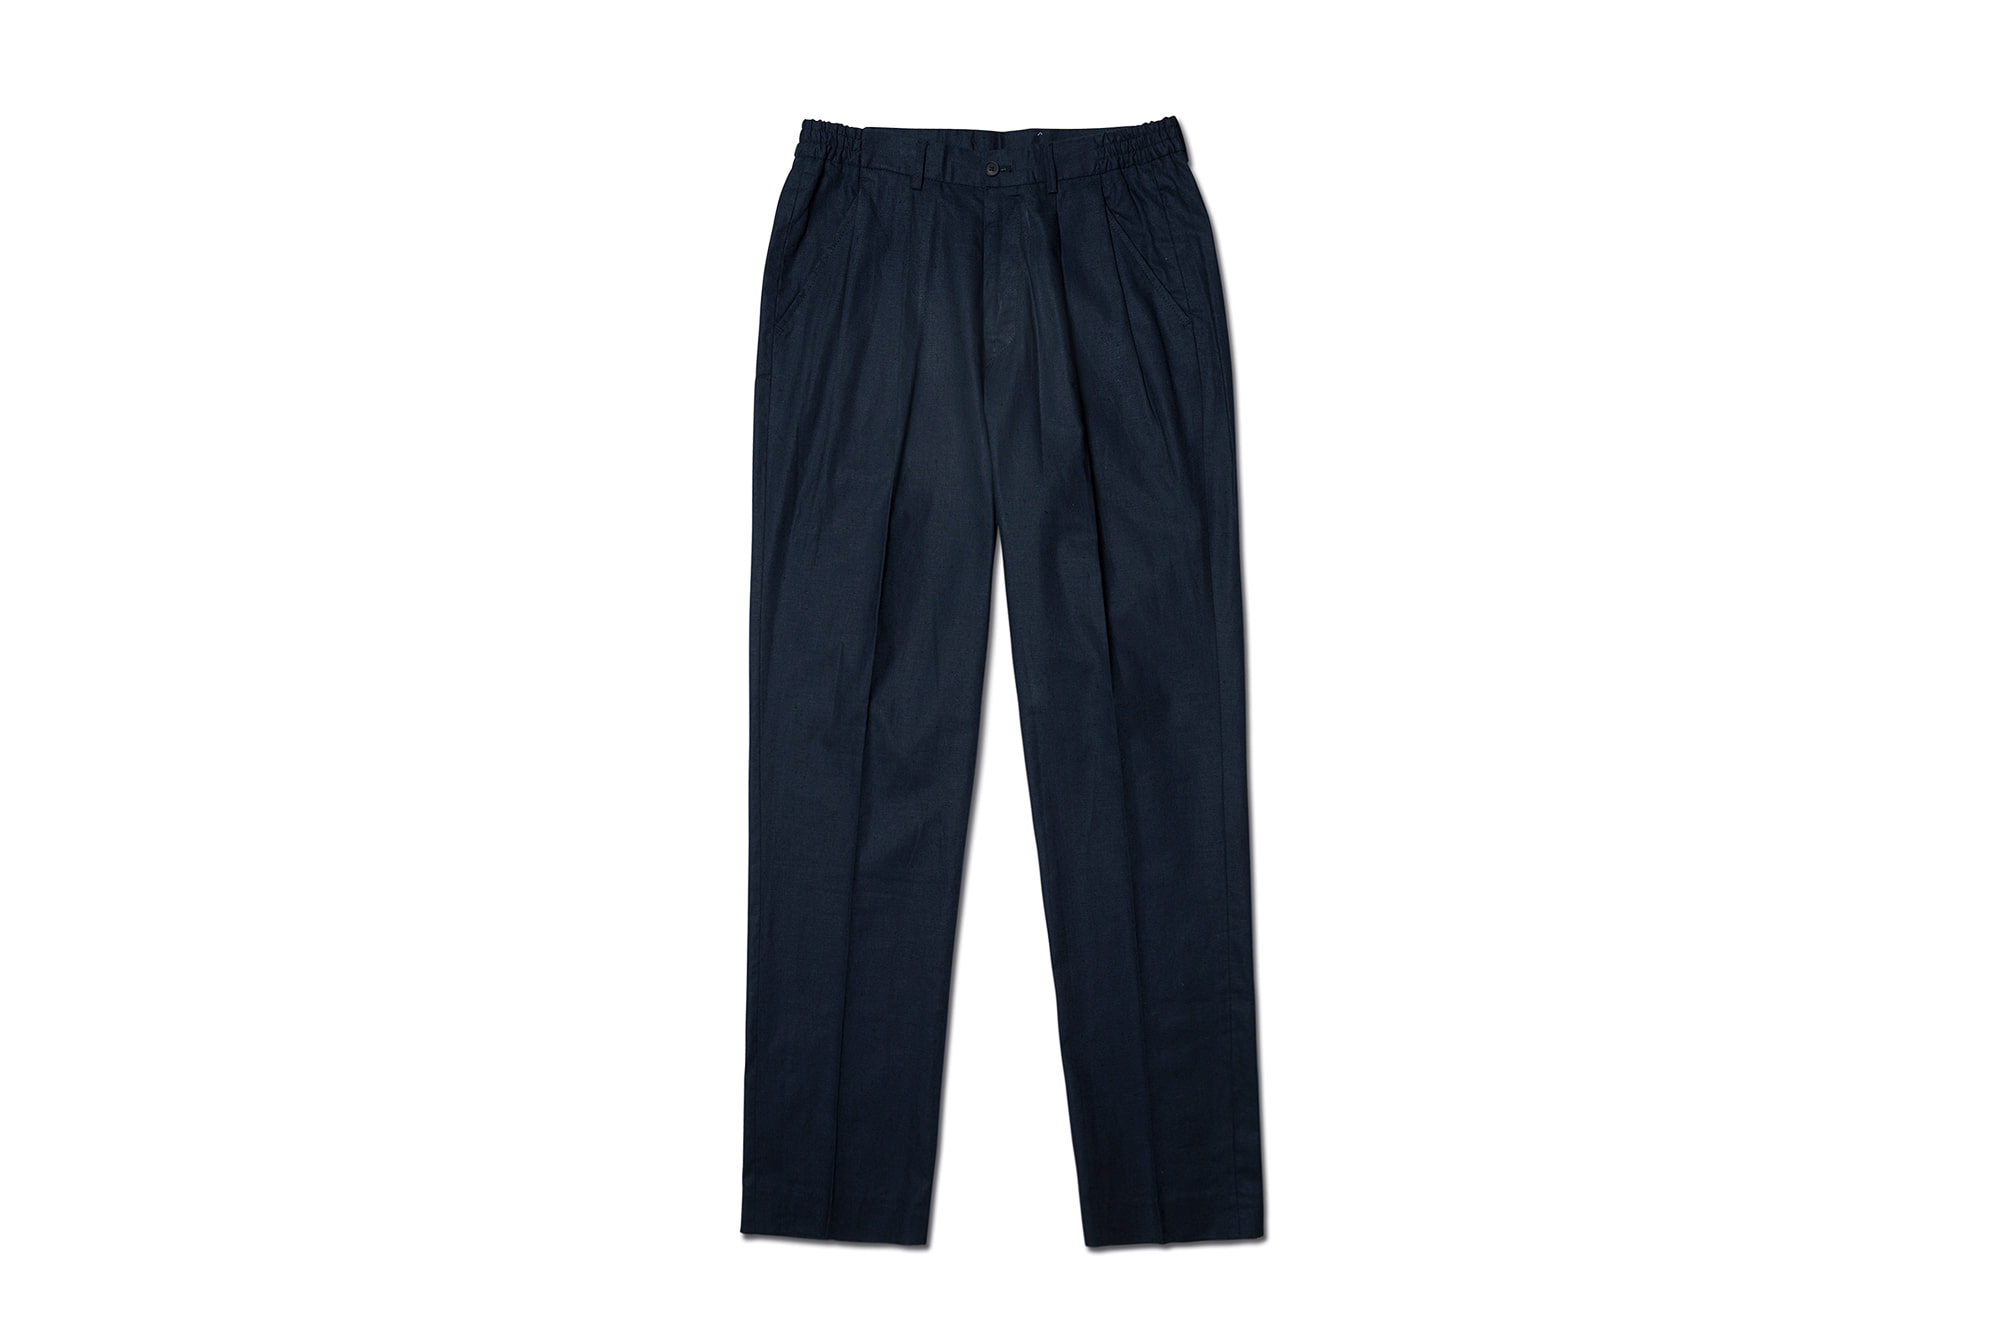 19ss Linen nice pants Navy [NIDDLE AND STITCH]